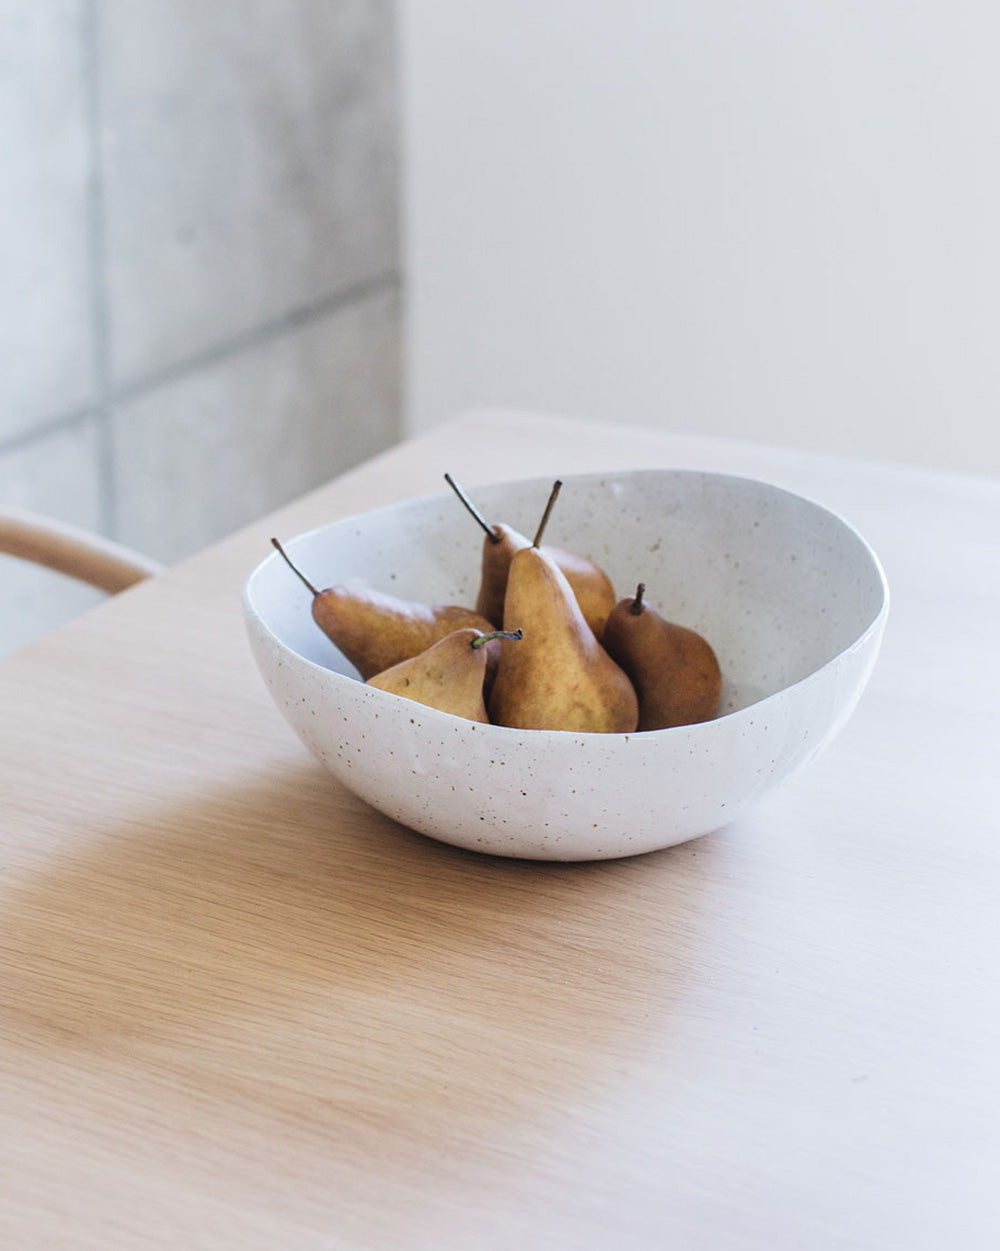 wabi sabi bowl filled with pears on a table